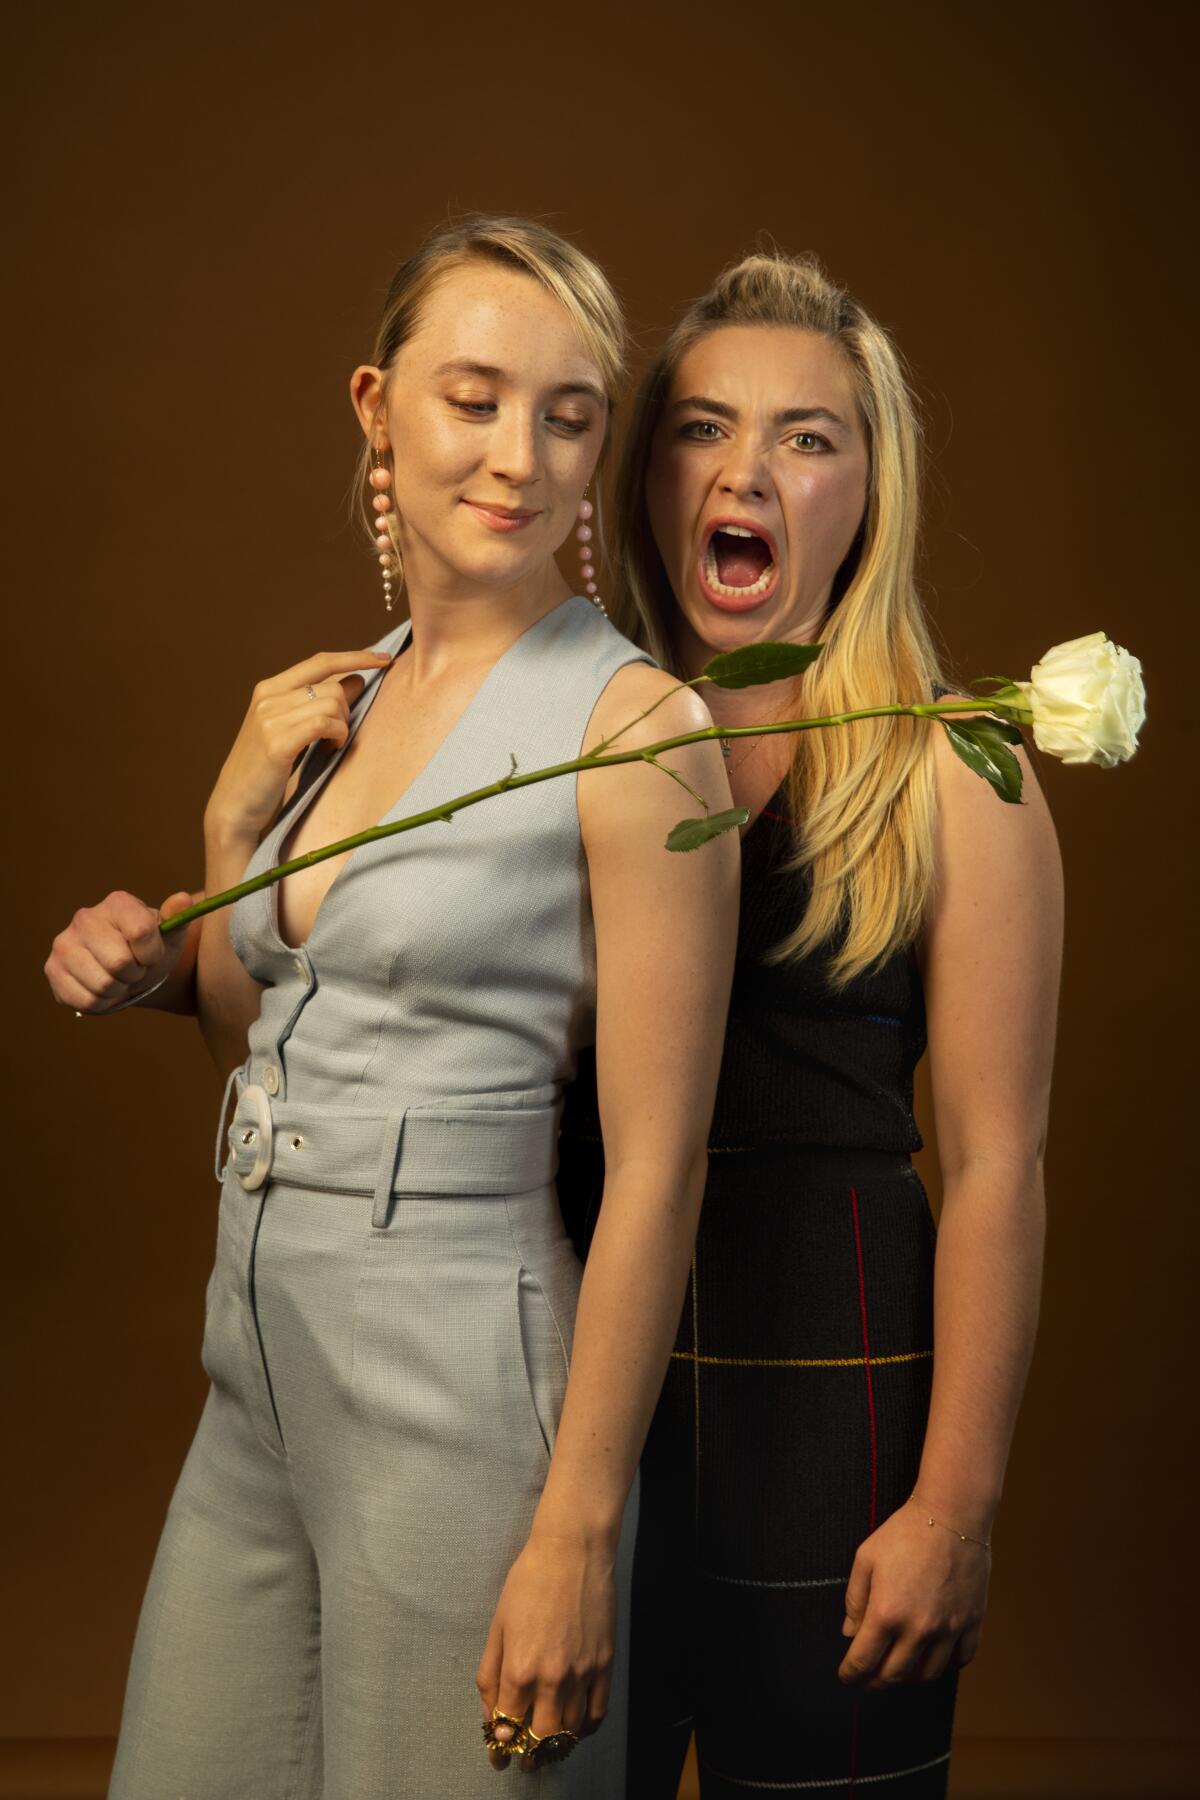 Florence Pugh, right, stands slightly beside and behind Saoirse Ronan, holding a long-stemmed white rose in front of them.